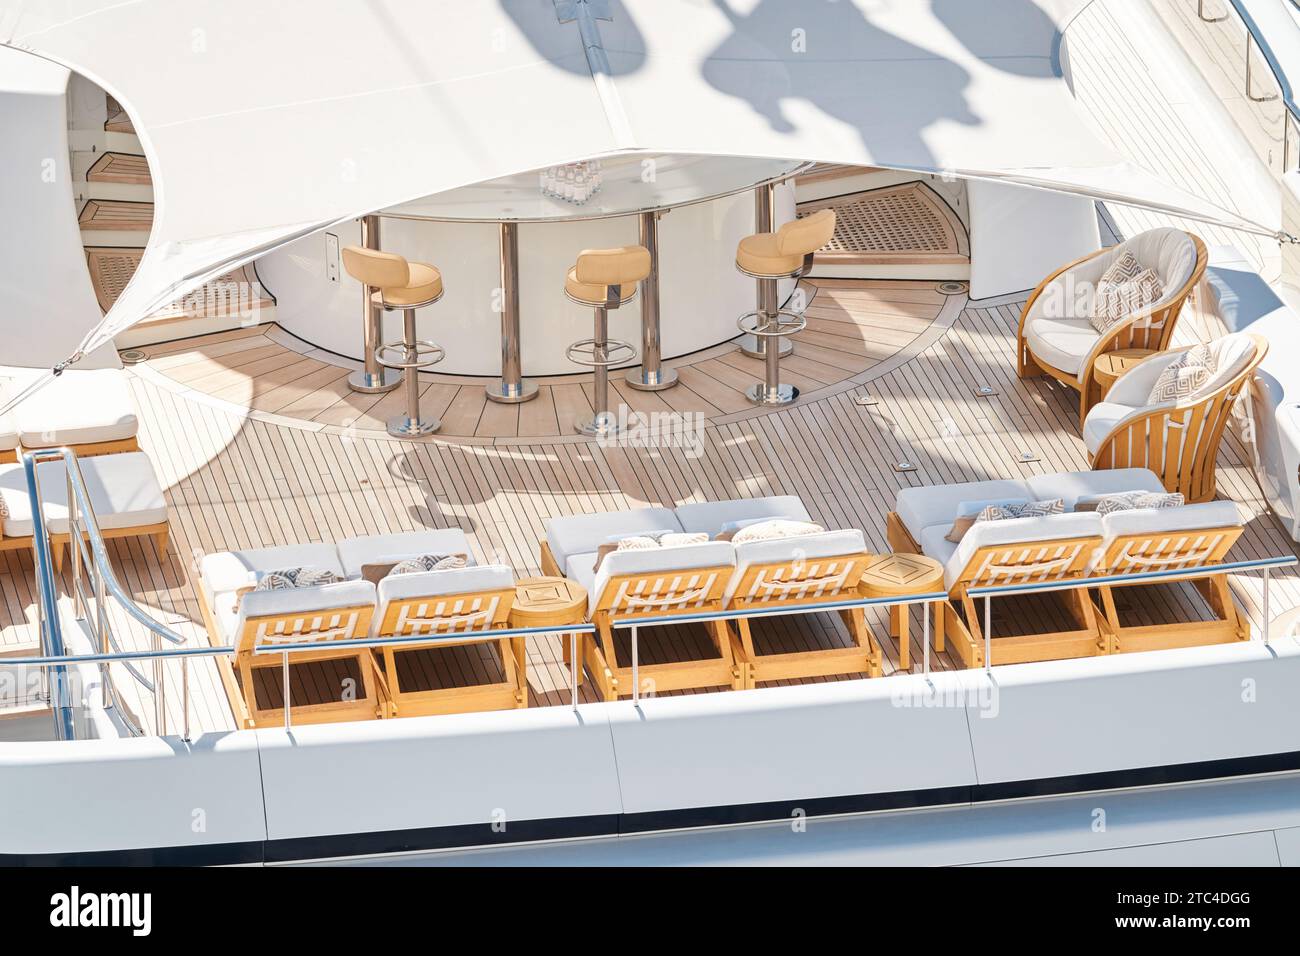 Close up footage of a relaxation area on the open teak deck of an expensive megayacht at sunny day, with awnings stretched over the deck to protect Stock Photo